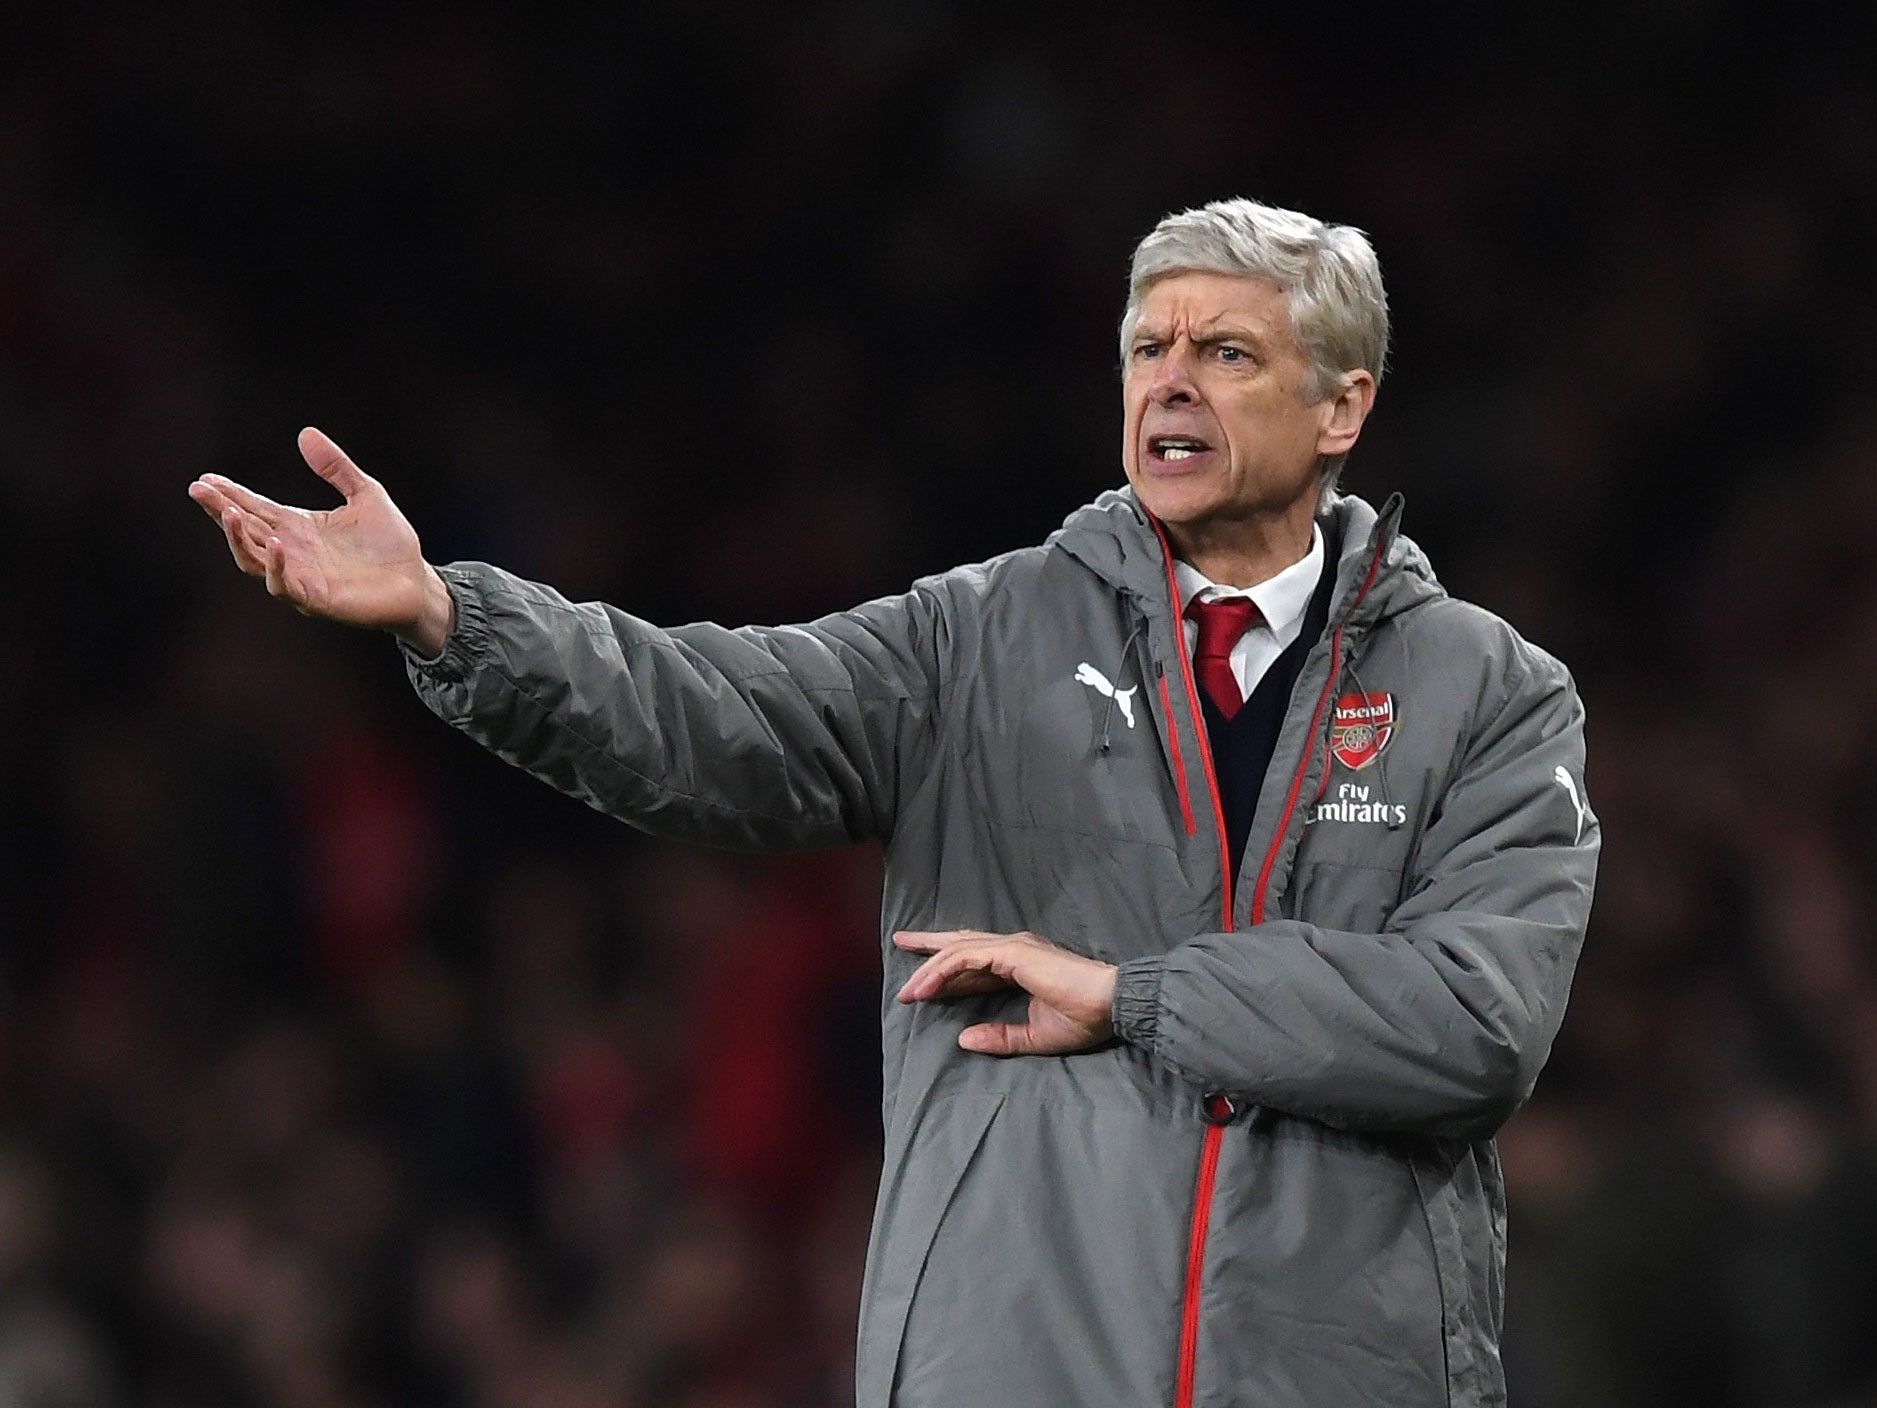 Arsenal could be consigned to the Europa League for next season